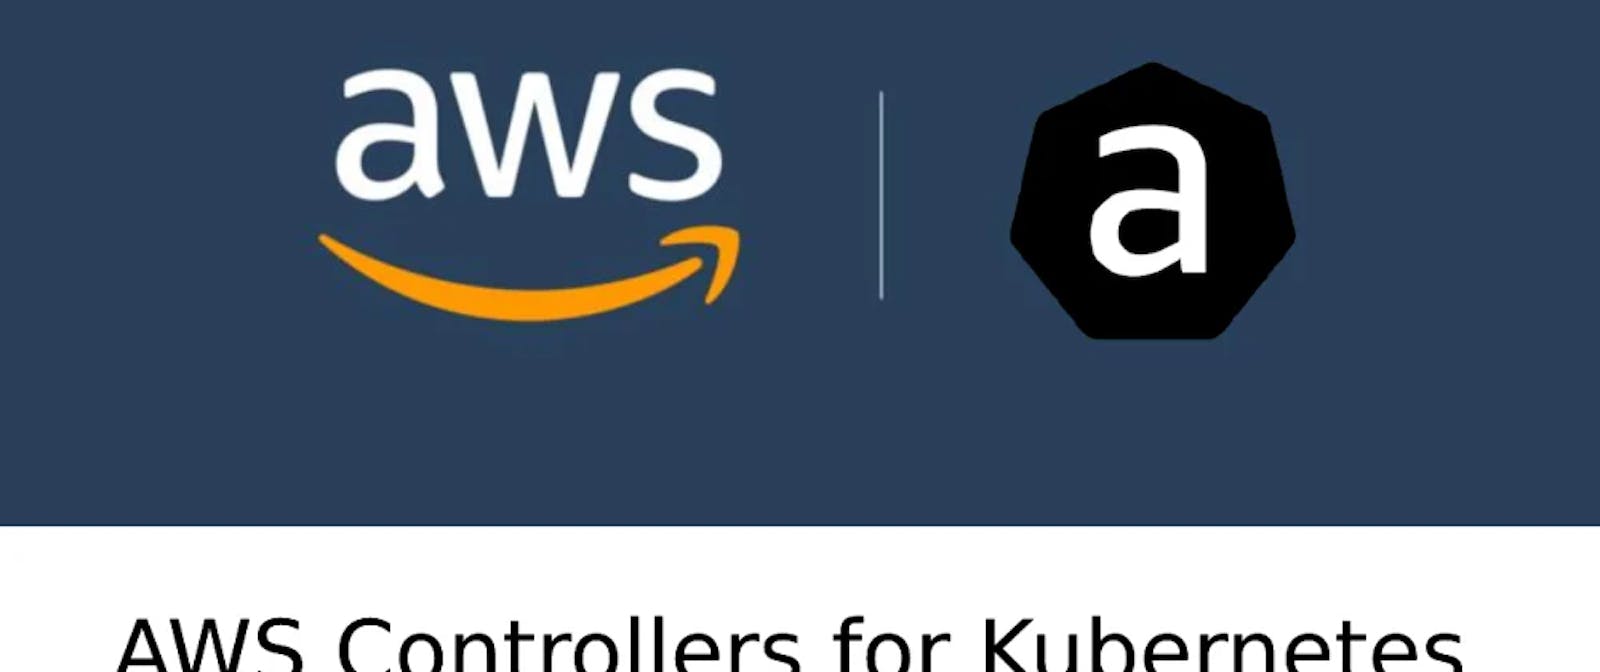 AWS Controllers for Kubernetes Hands-on